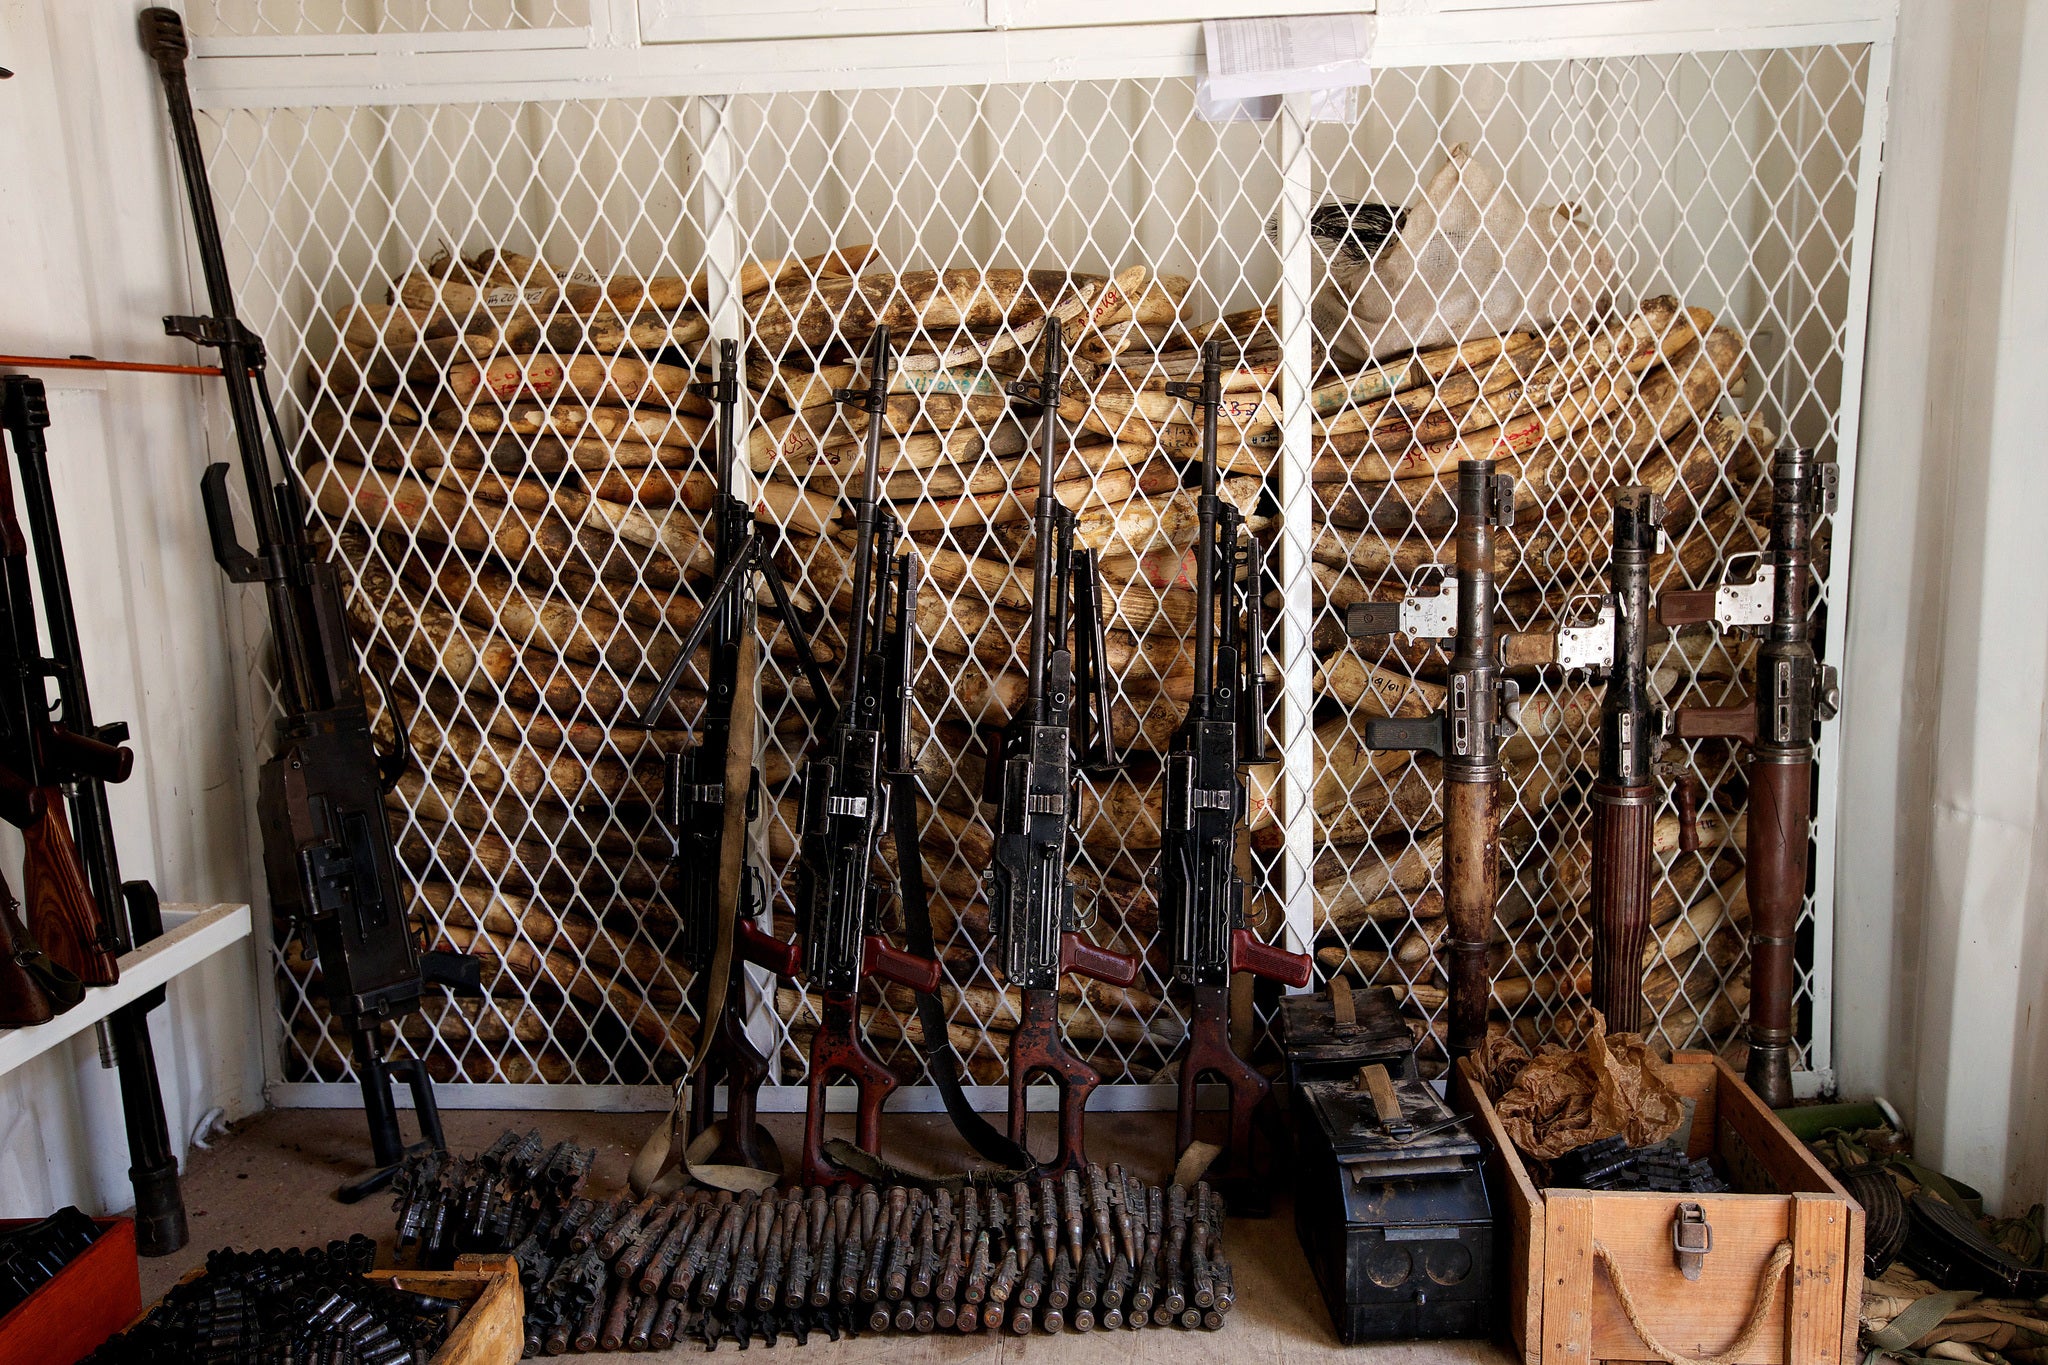 Tusks seized in the Zakouma National Park, in Central Africa, are stacked high